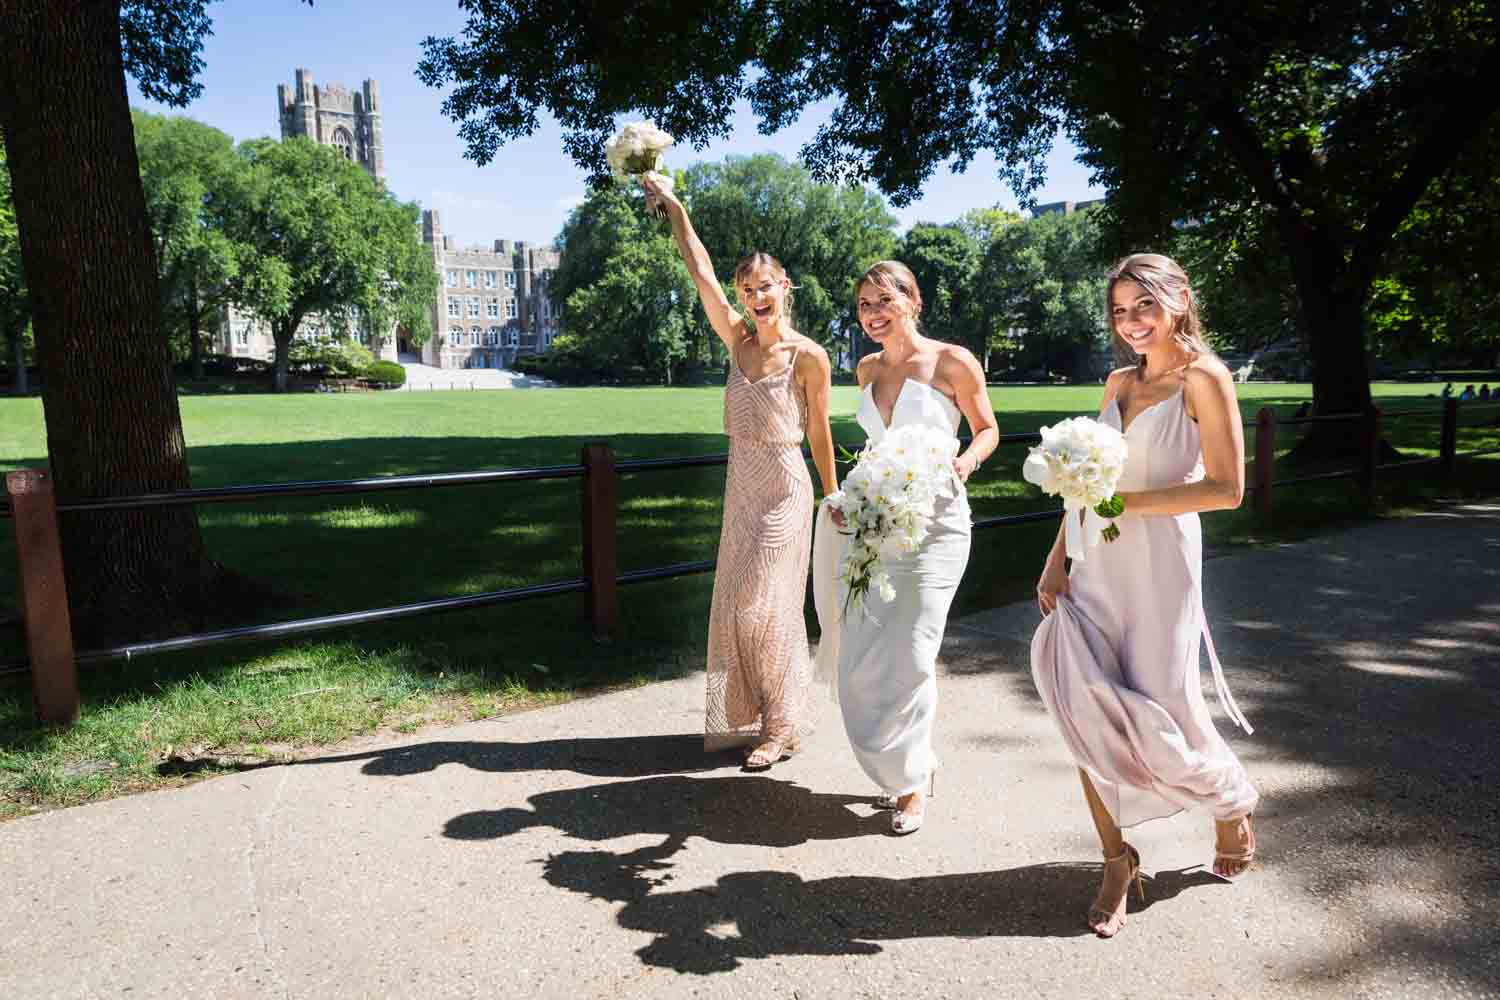 Bride and bridesmaids cheering for an article on Bronx Zoo wedding venue updates